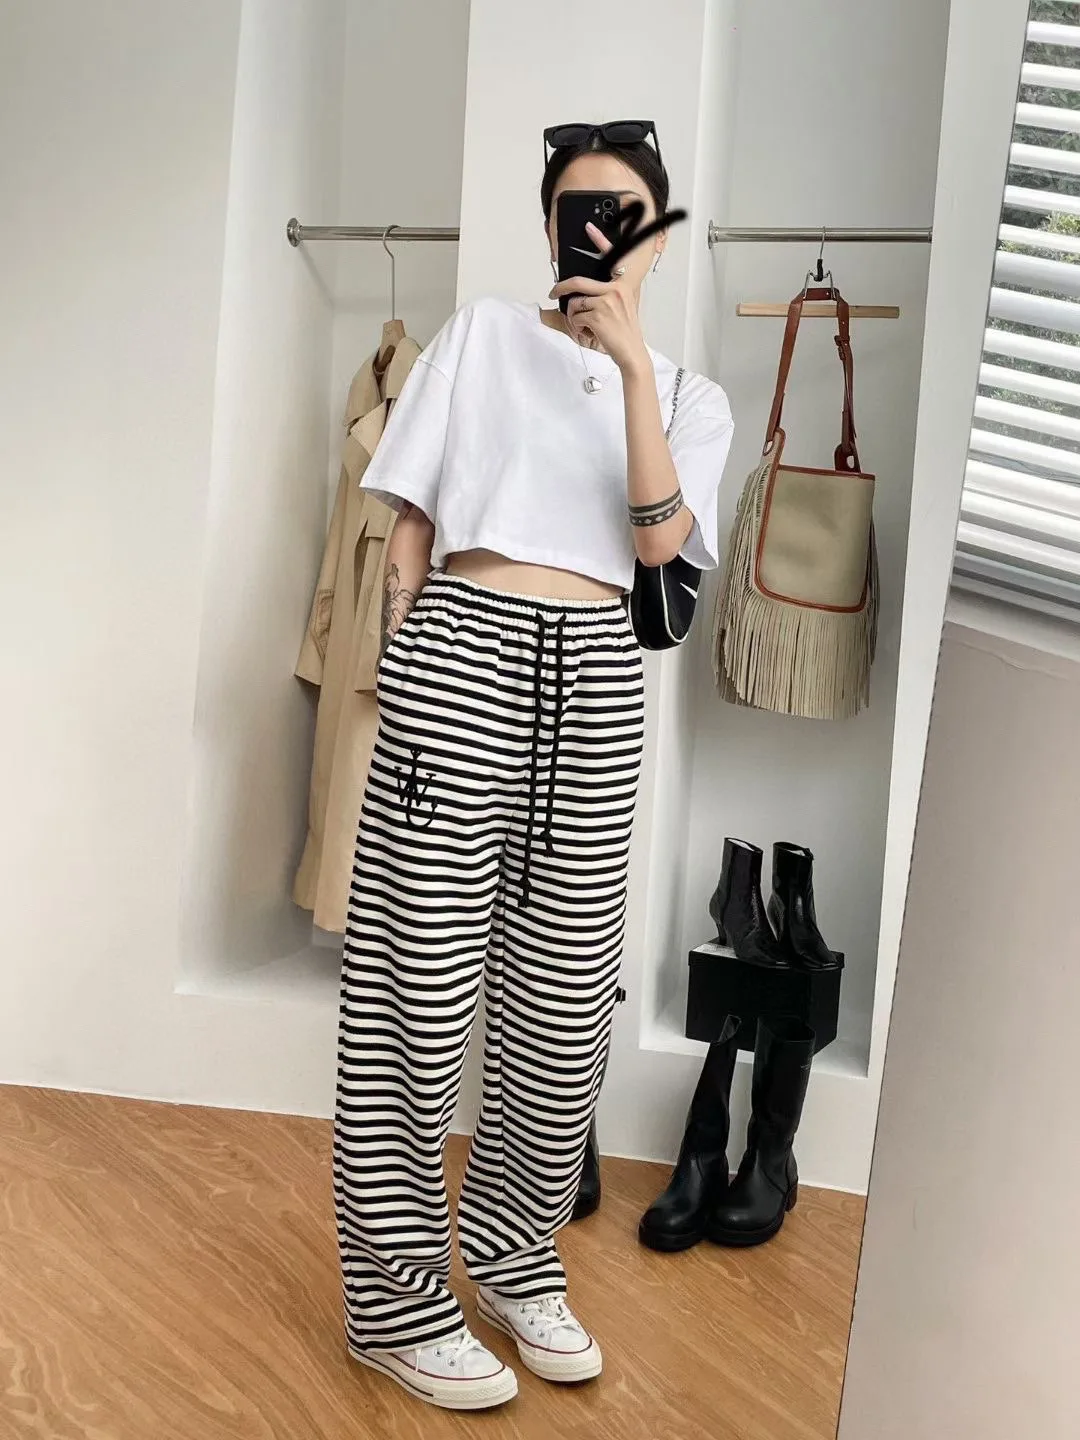 2021 FW Jil Striped Women's Guard Pants Spring and Autumn High Waist Straight Tube Floor Mopping Casual Sports Pants Trend work trousers